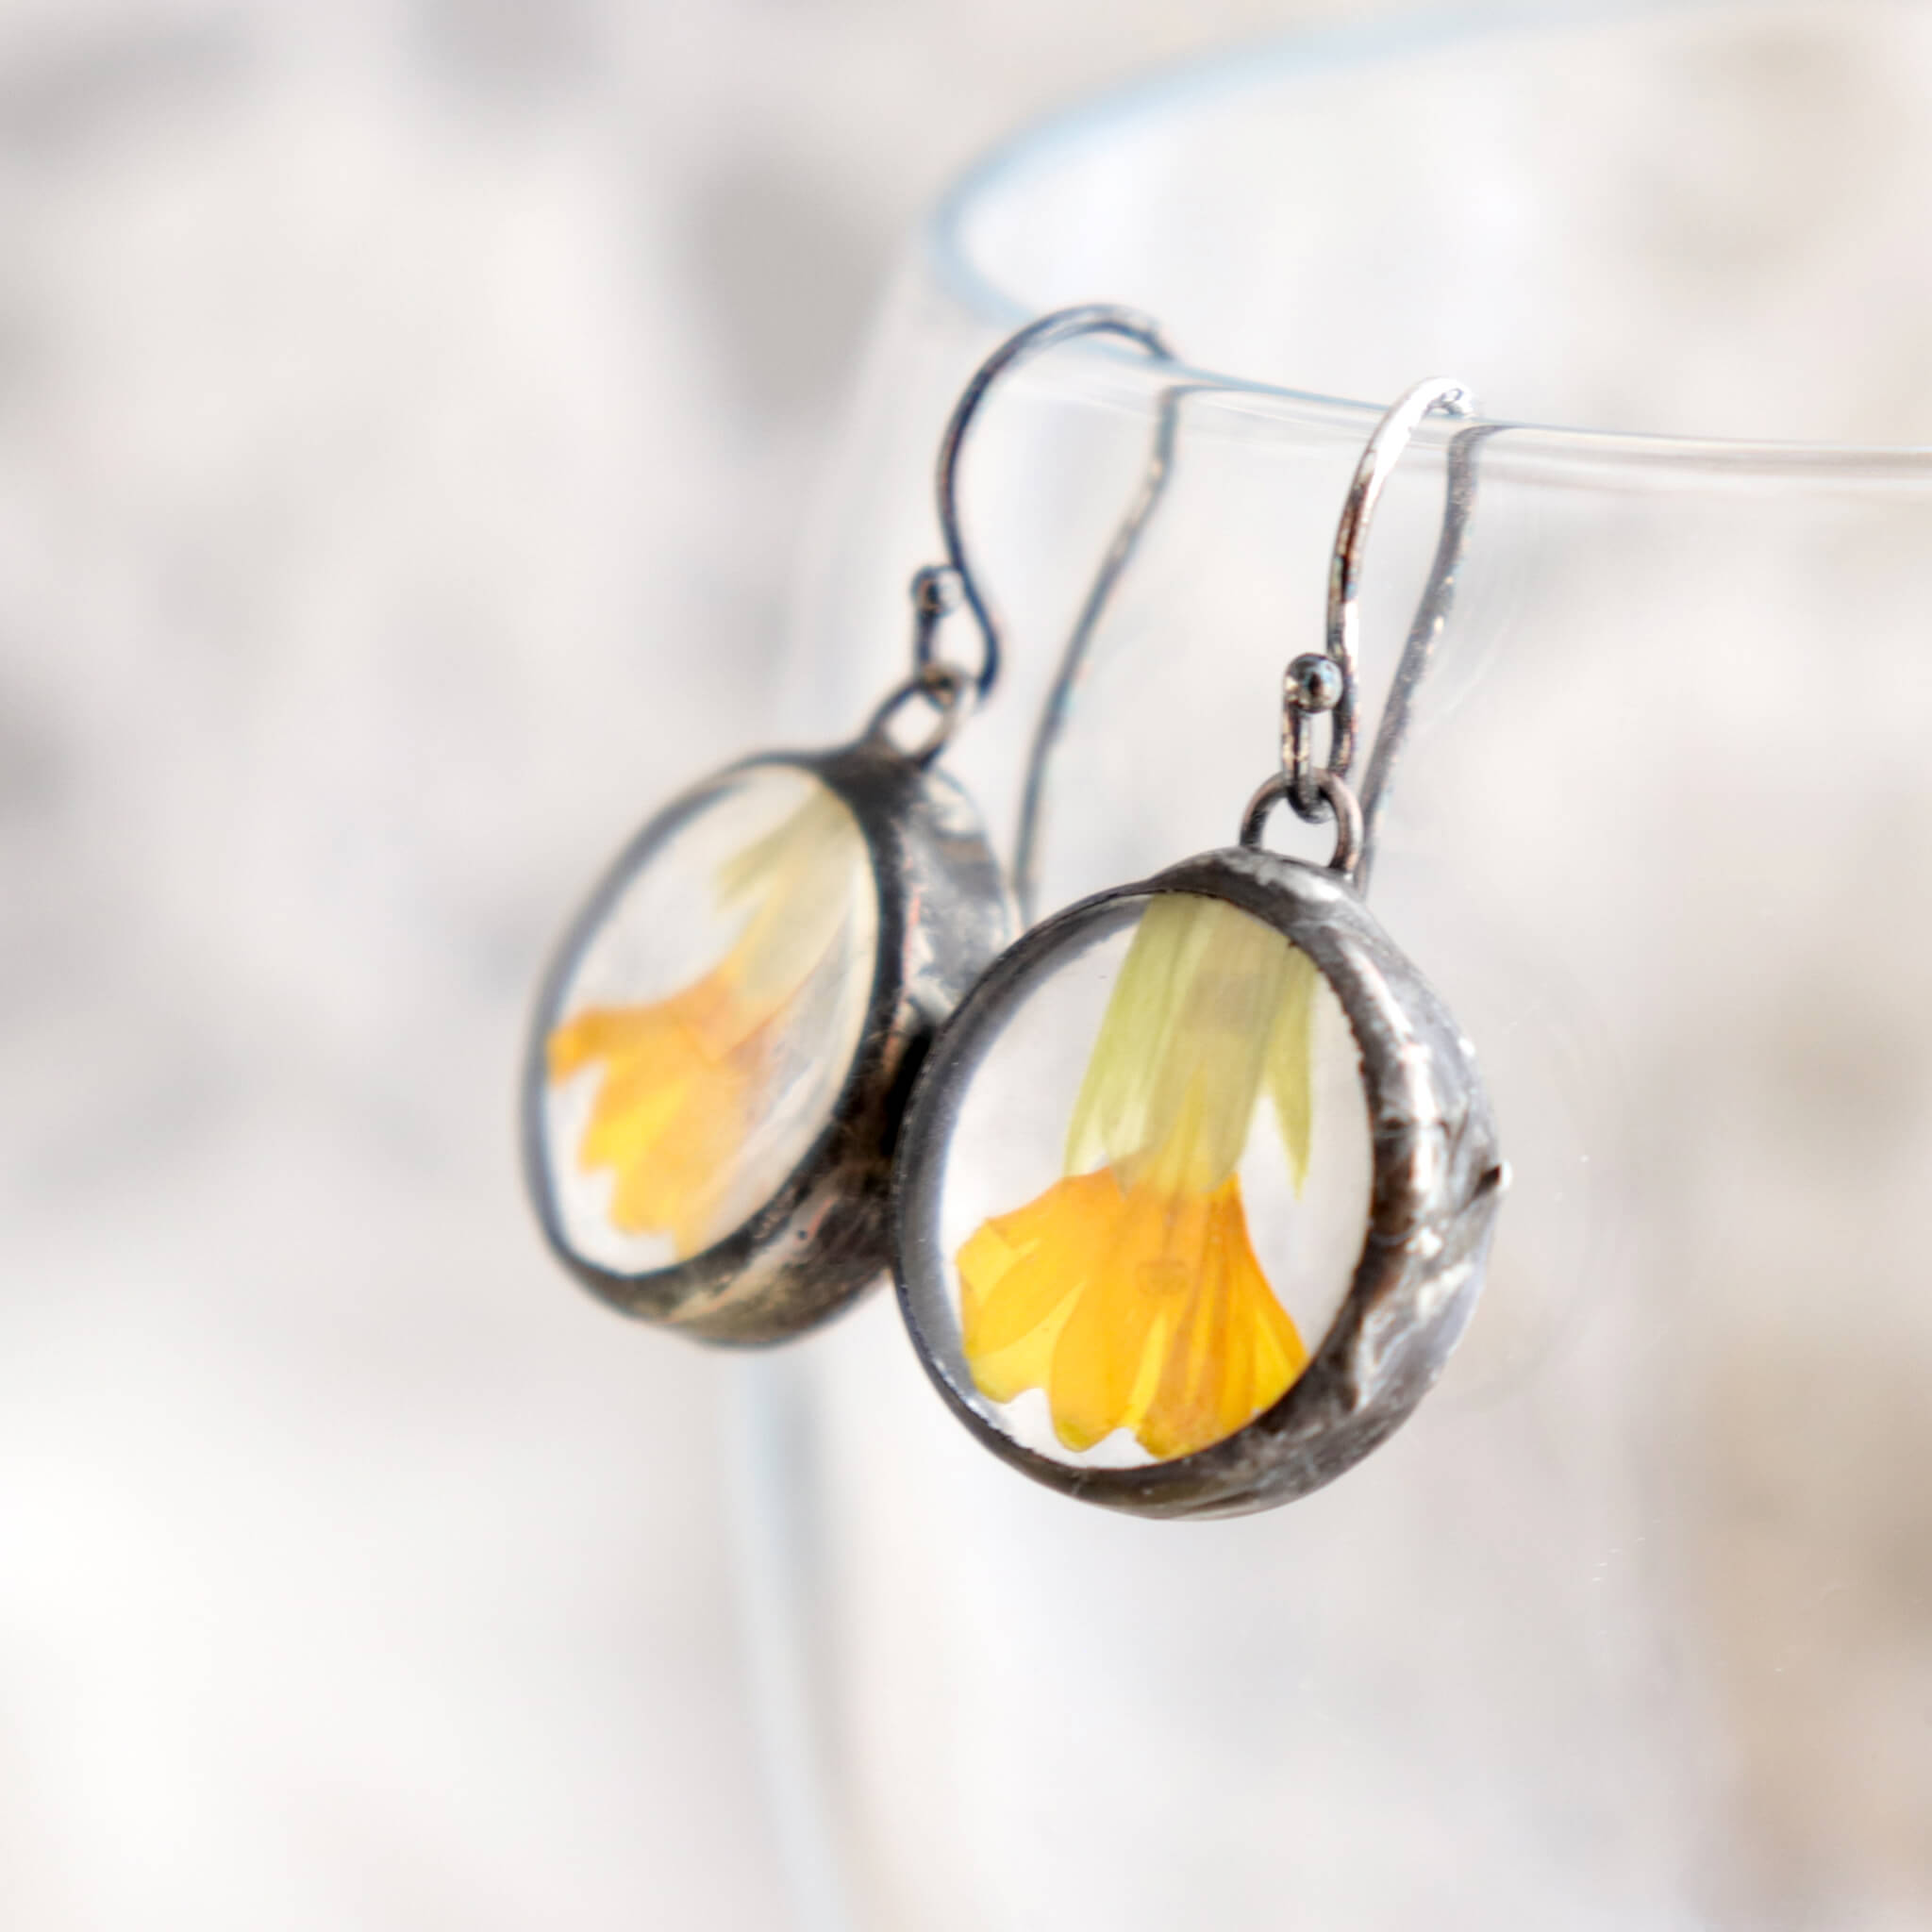 Primroses in soldered glass earrings hanging from the edge of a glass